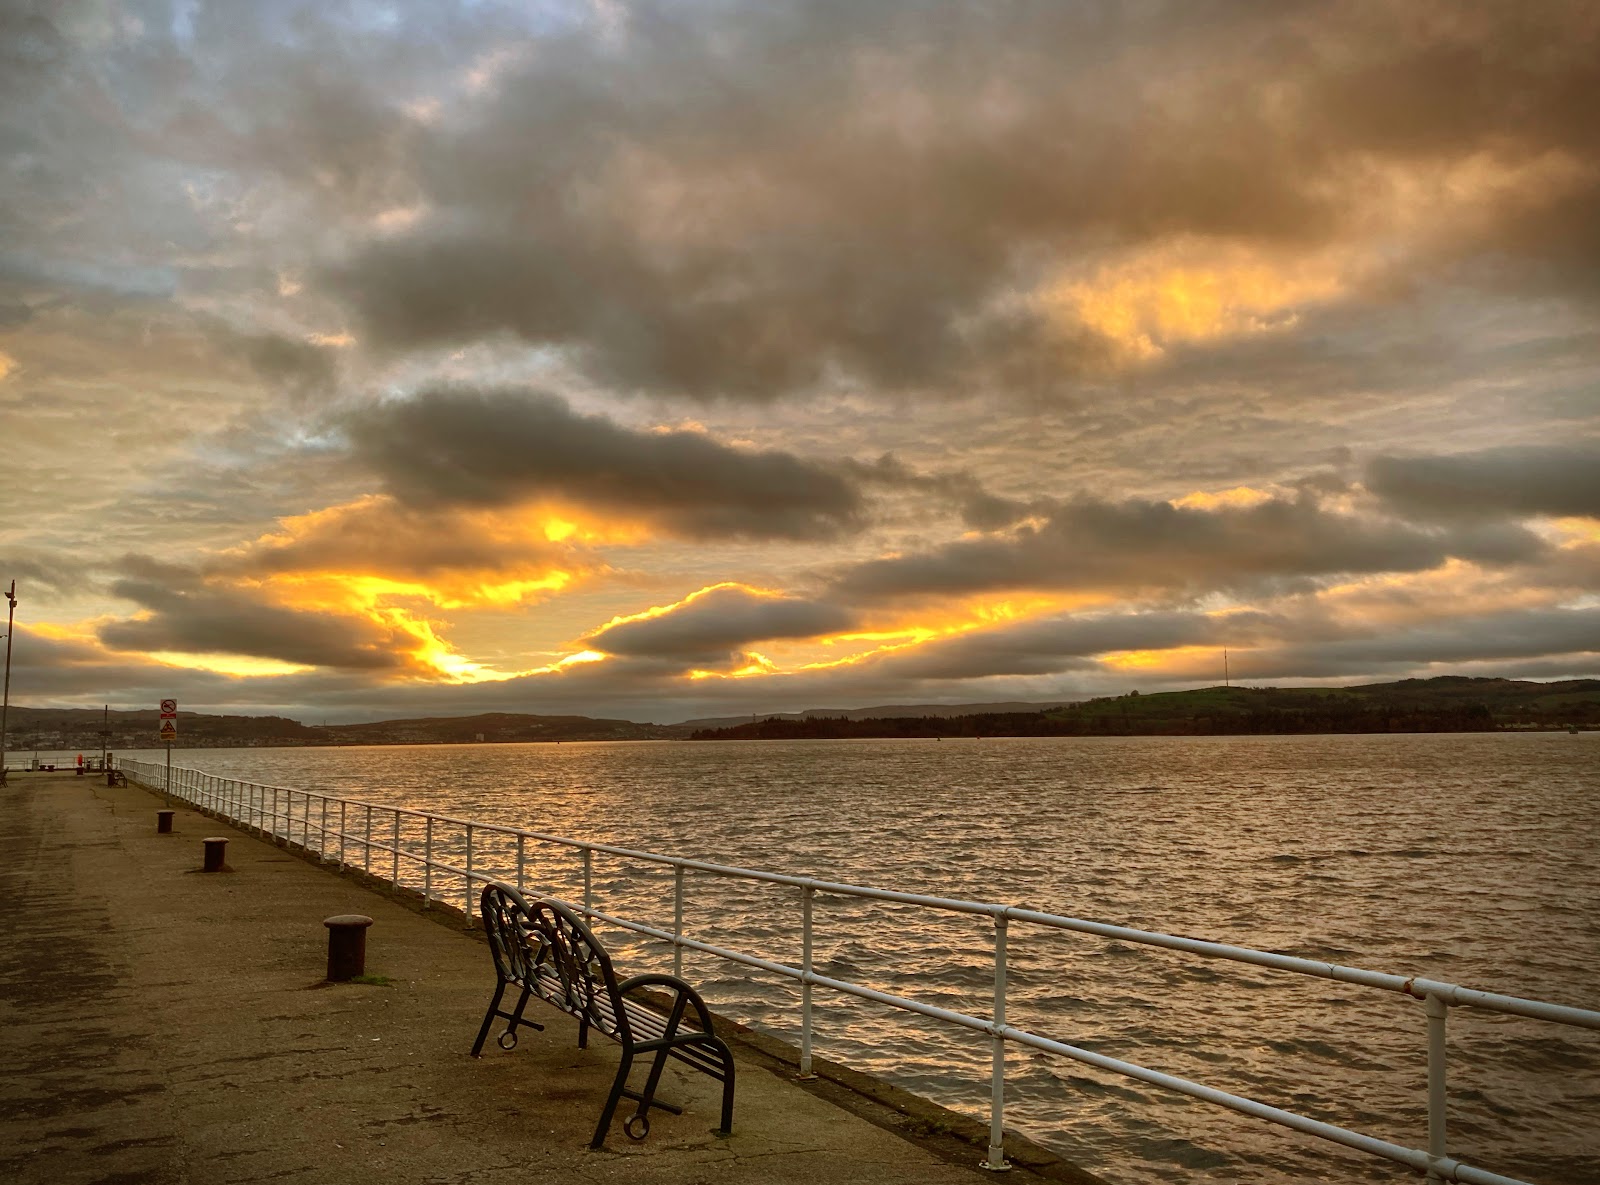 https://whatremovals.co.uk/wp-content/uploads/2022/02/Helensburgh Seafront-300x222.jpeg